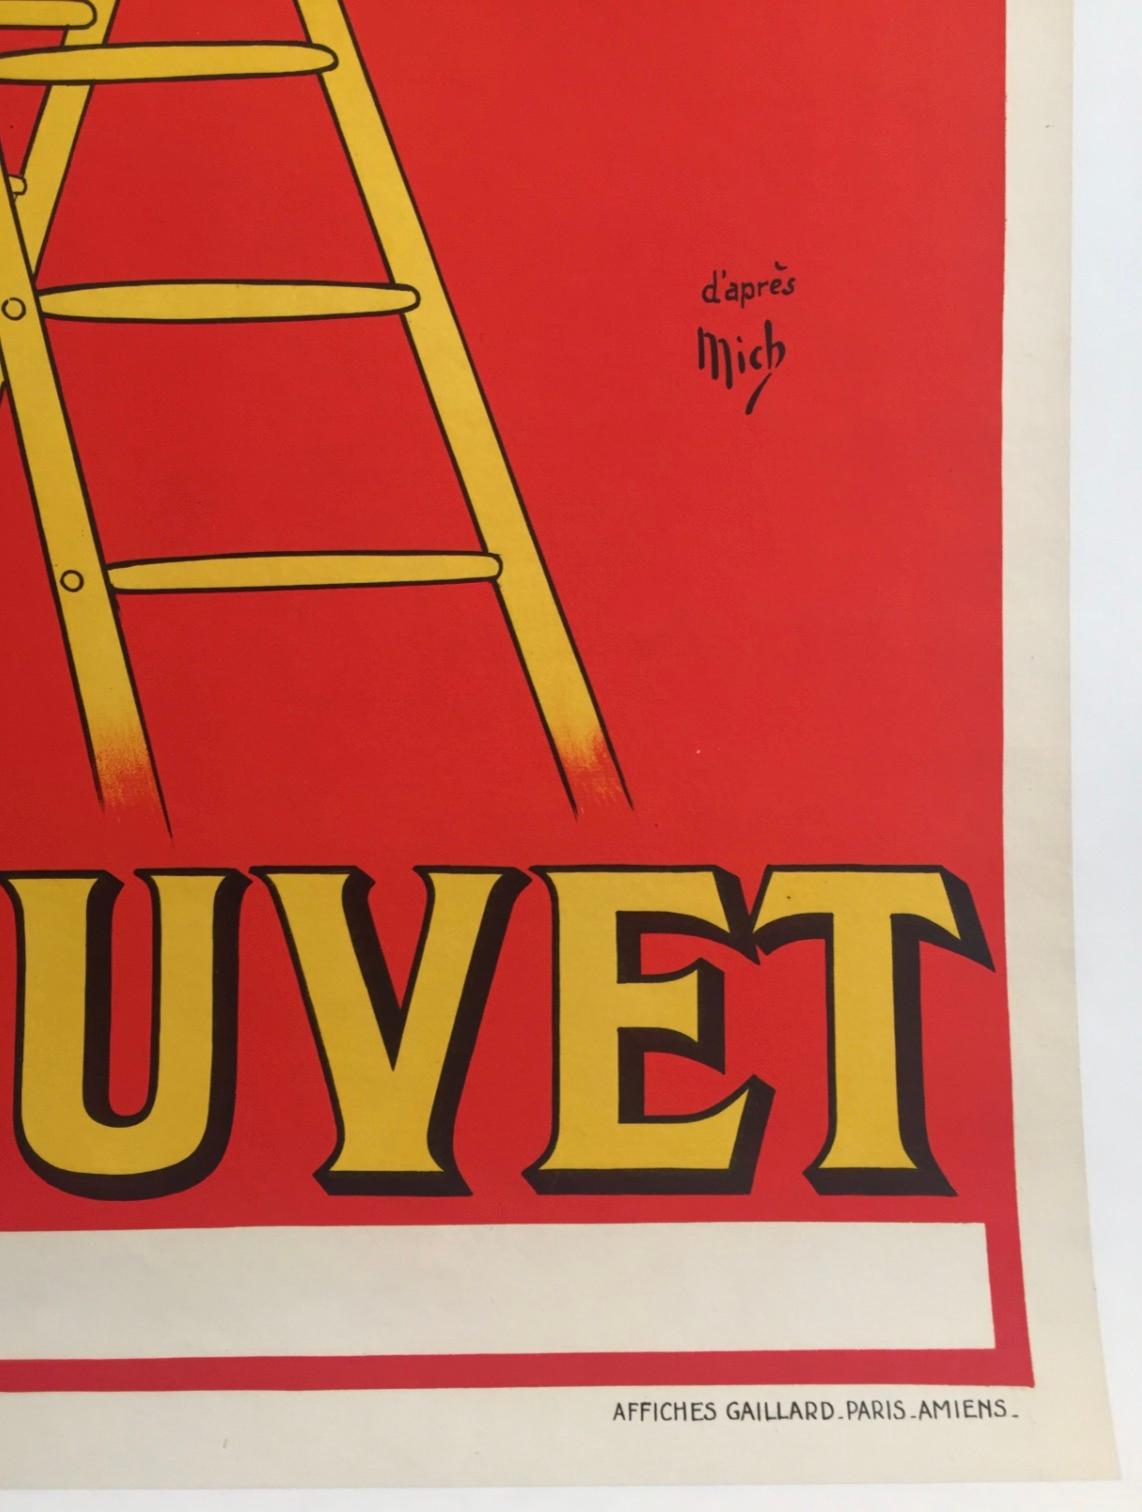 Early 20th Century Original Vintage French Art Deco Poster, 'JB LOUVET', 1919 by Mich For Sale